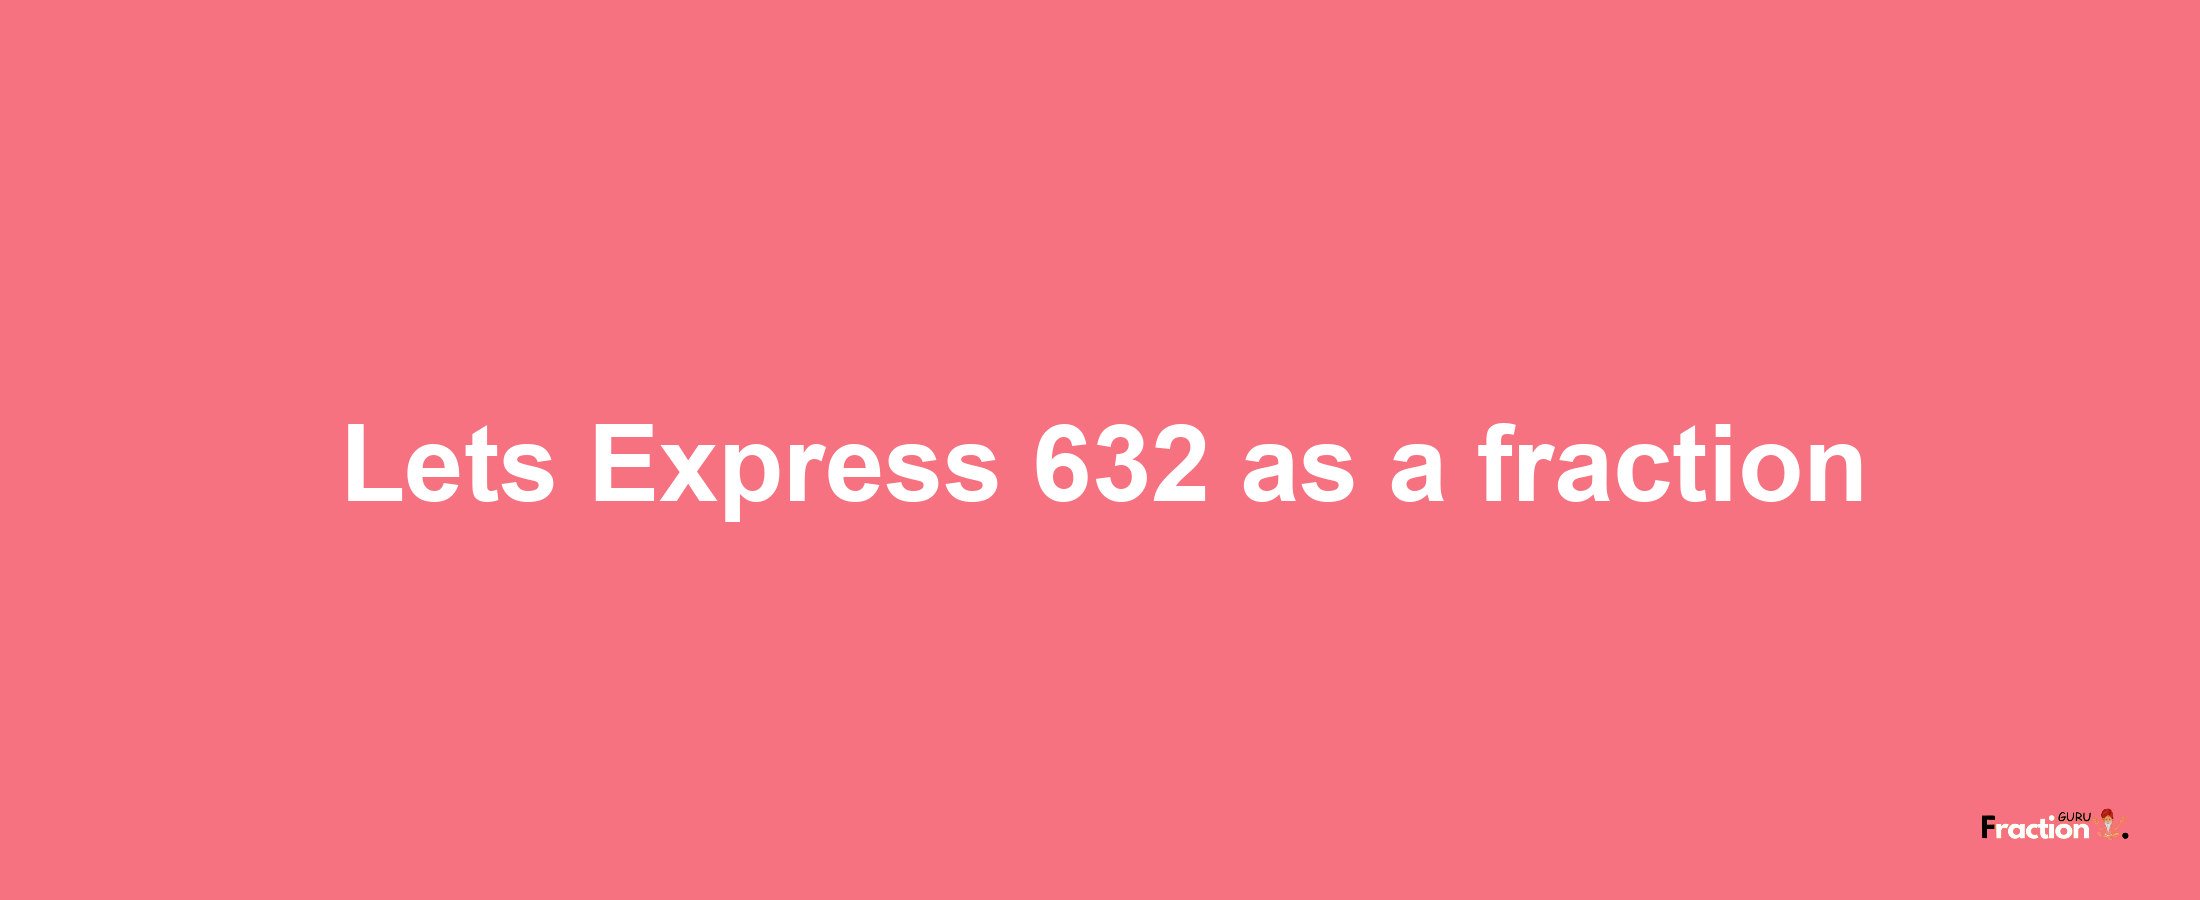 Lets Express 632 as afraction